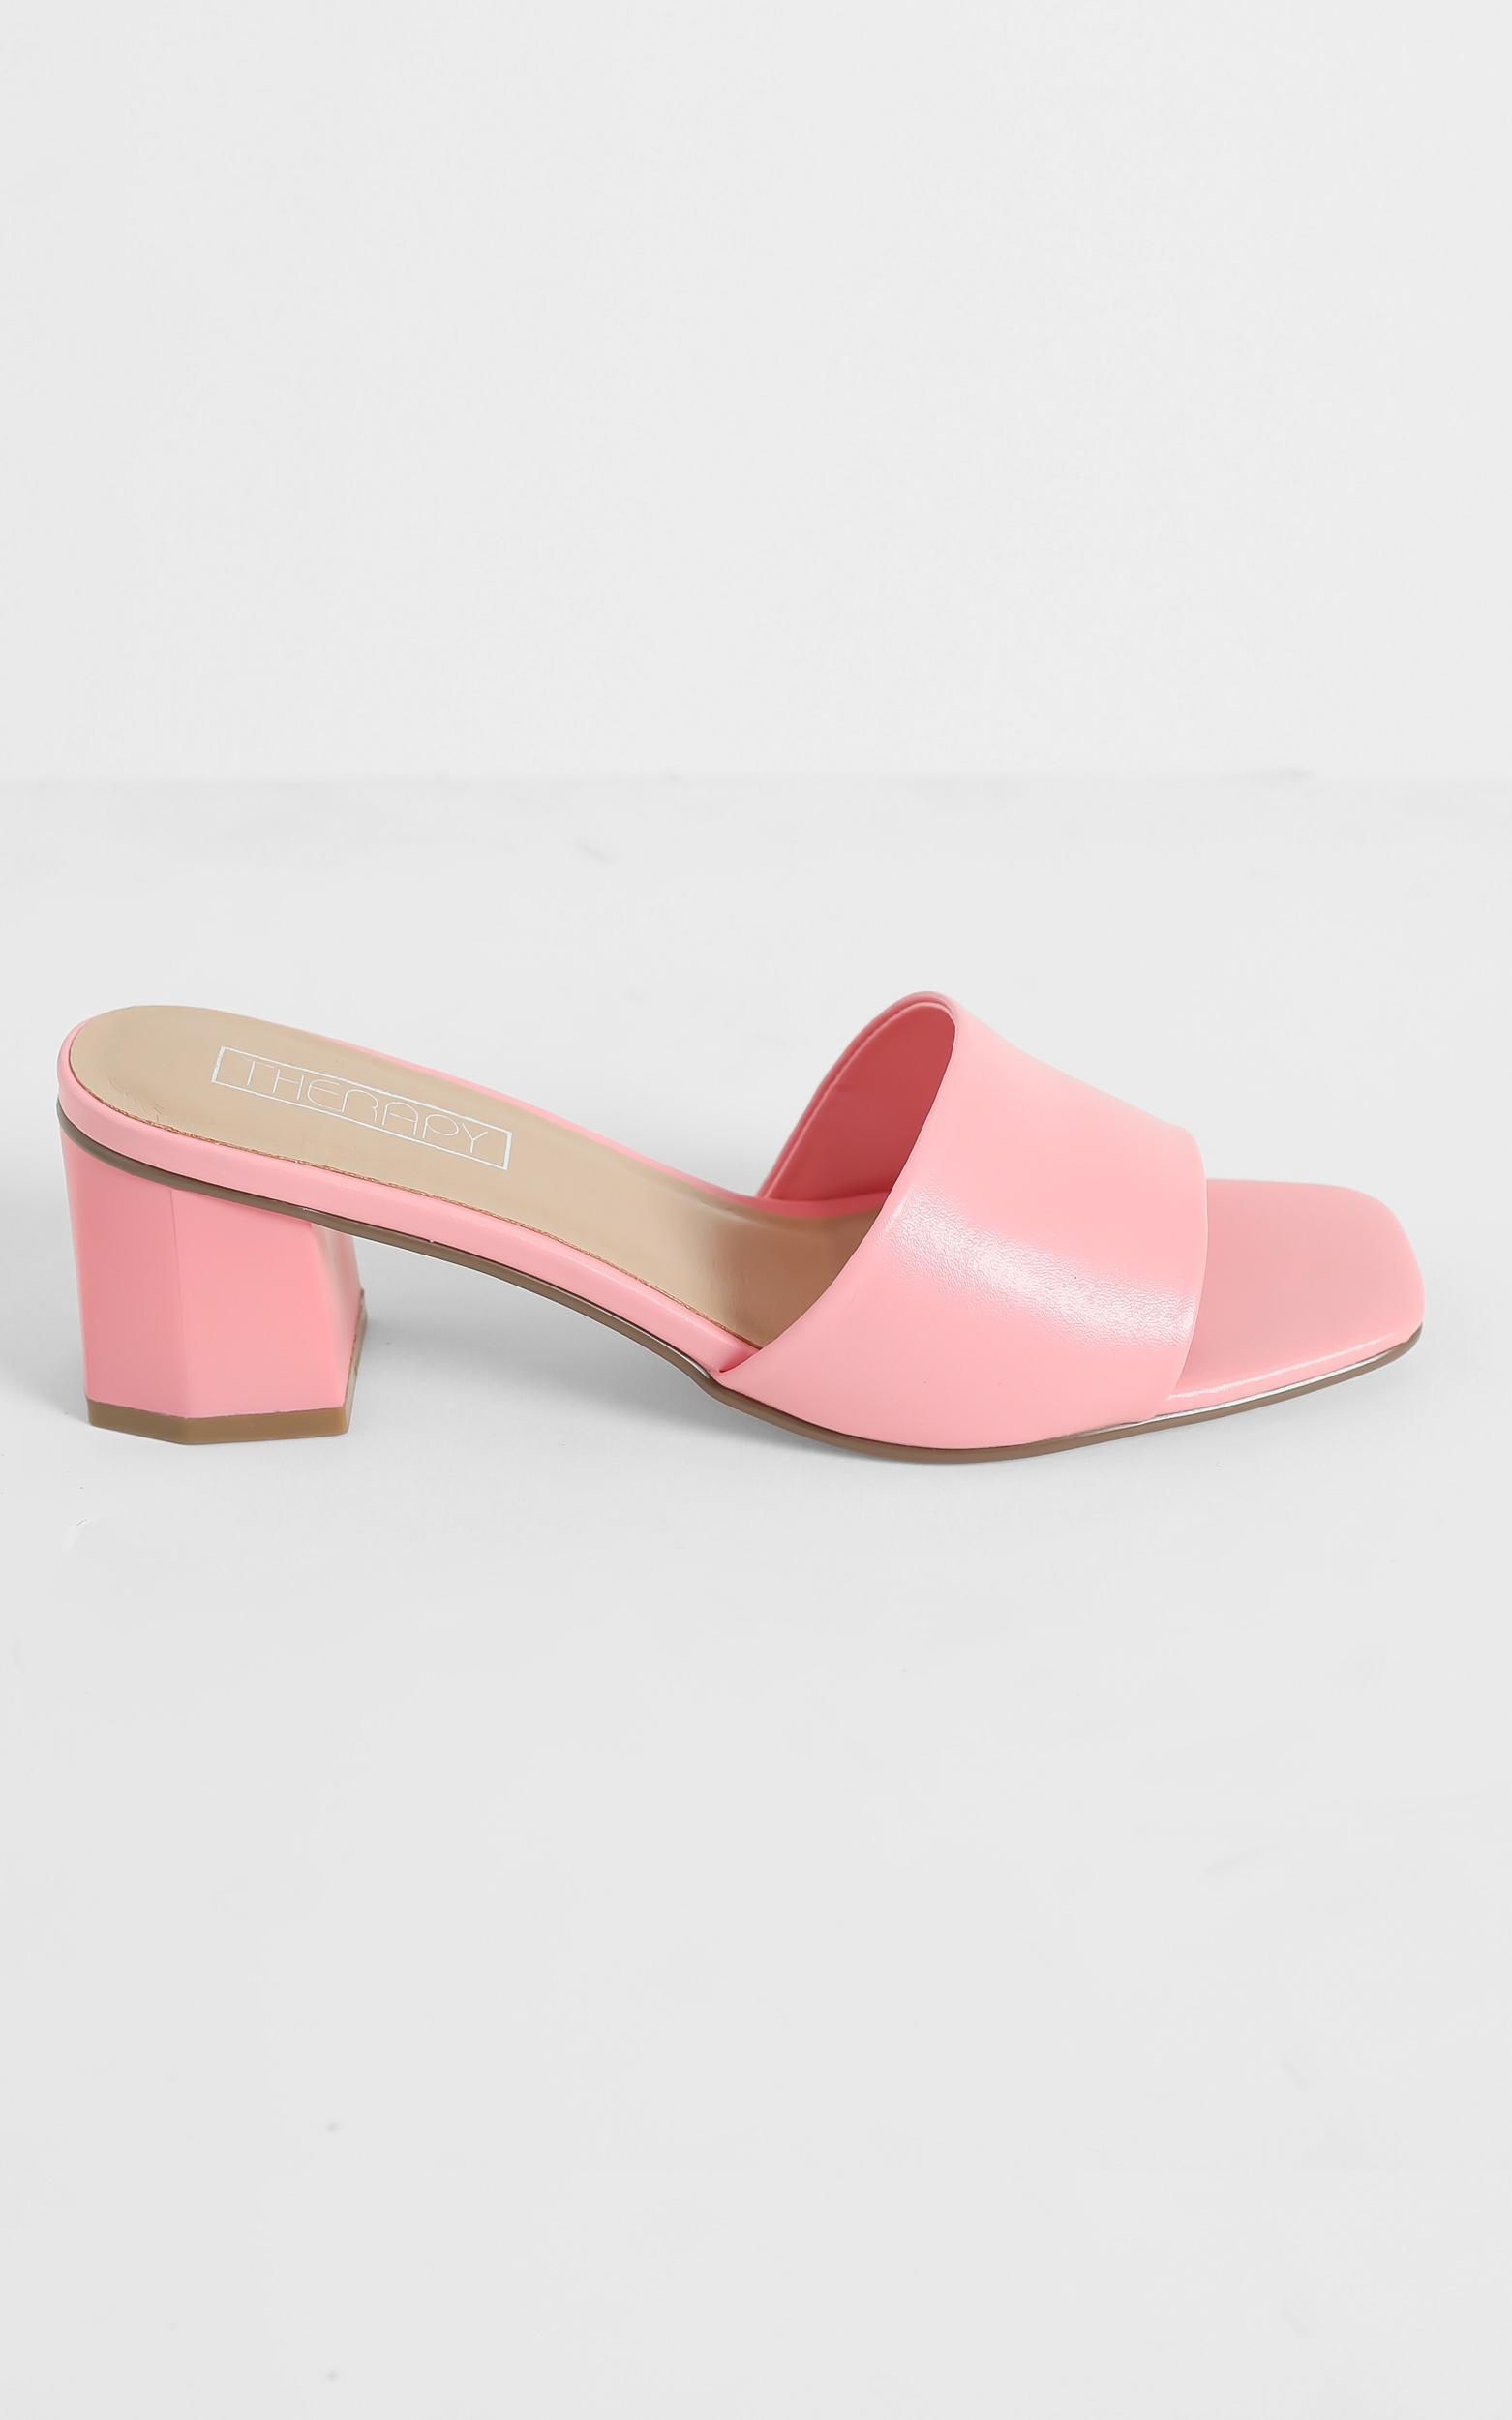 Therapy - Nyla Heels in Pink | Showpo - deactived